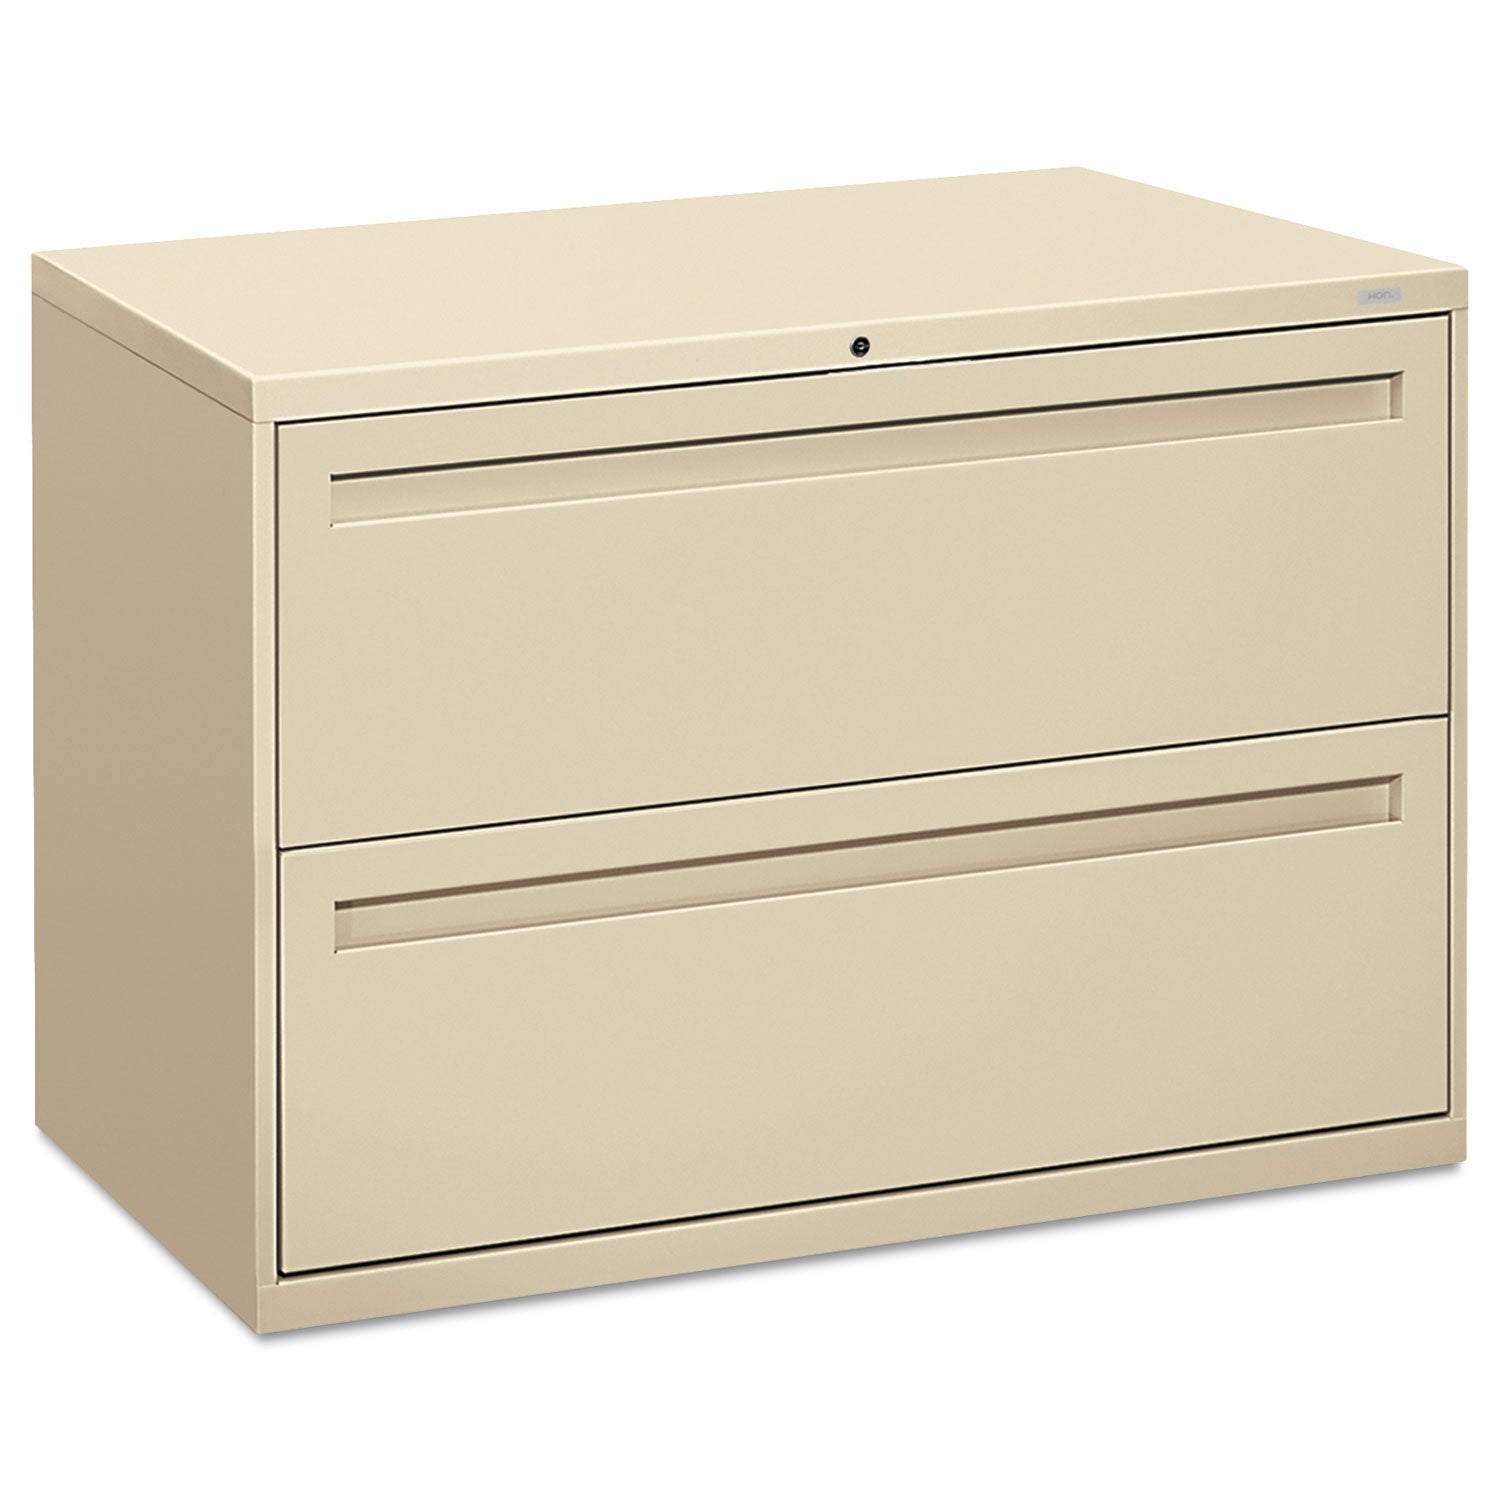 Brigade 700 Series Lateral File, 2 Legal/Letter-Size File Drawers, Putty, 42" x 18" x 28 - 